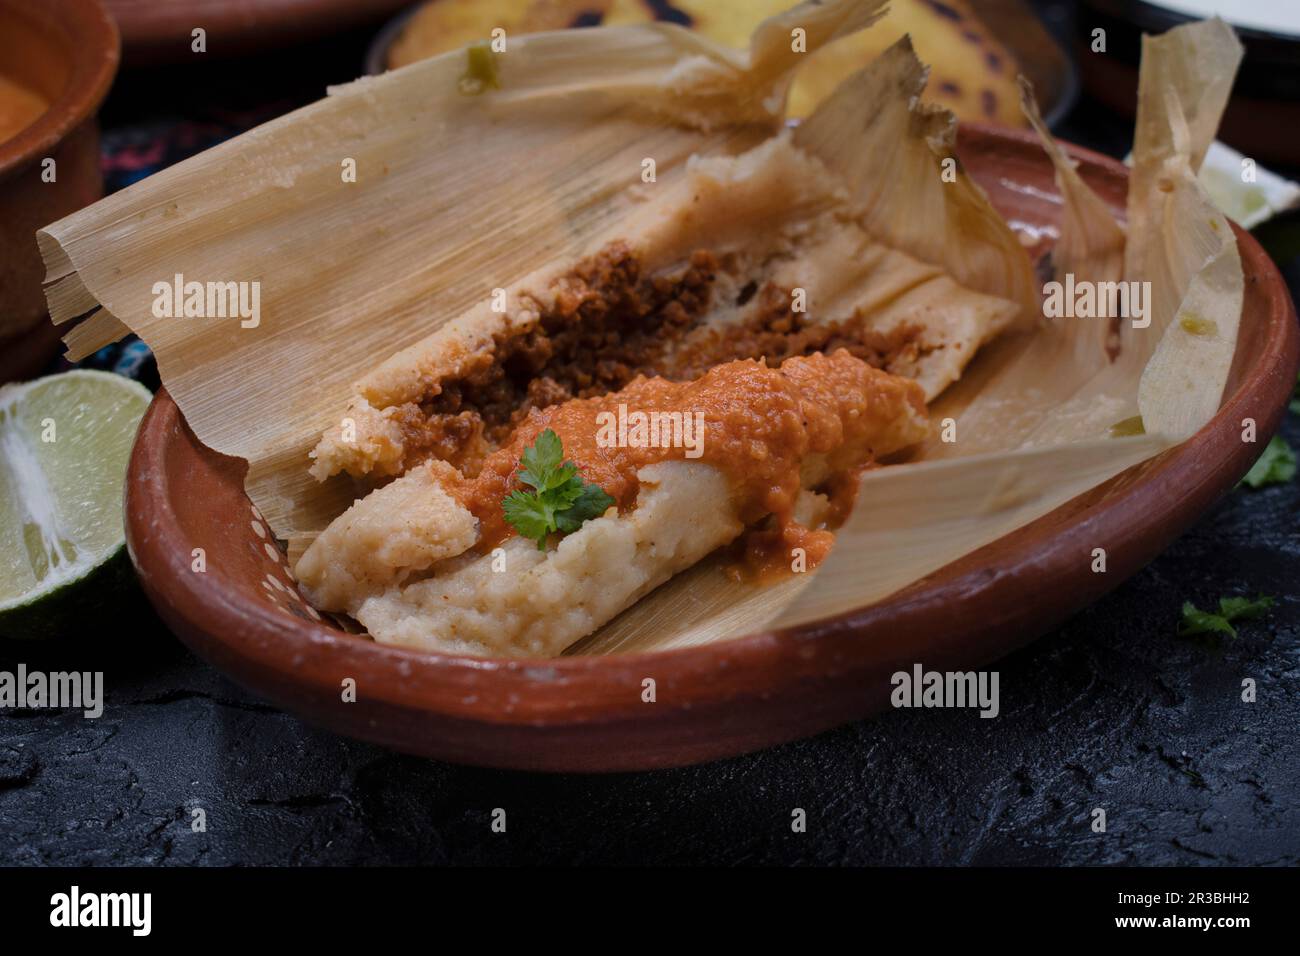 Vegan tamales filled with seitan, masa, chile verde and served with ranchero sauce, cream and chili beans Stock Photo